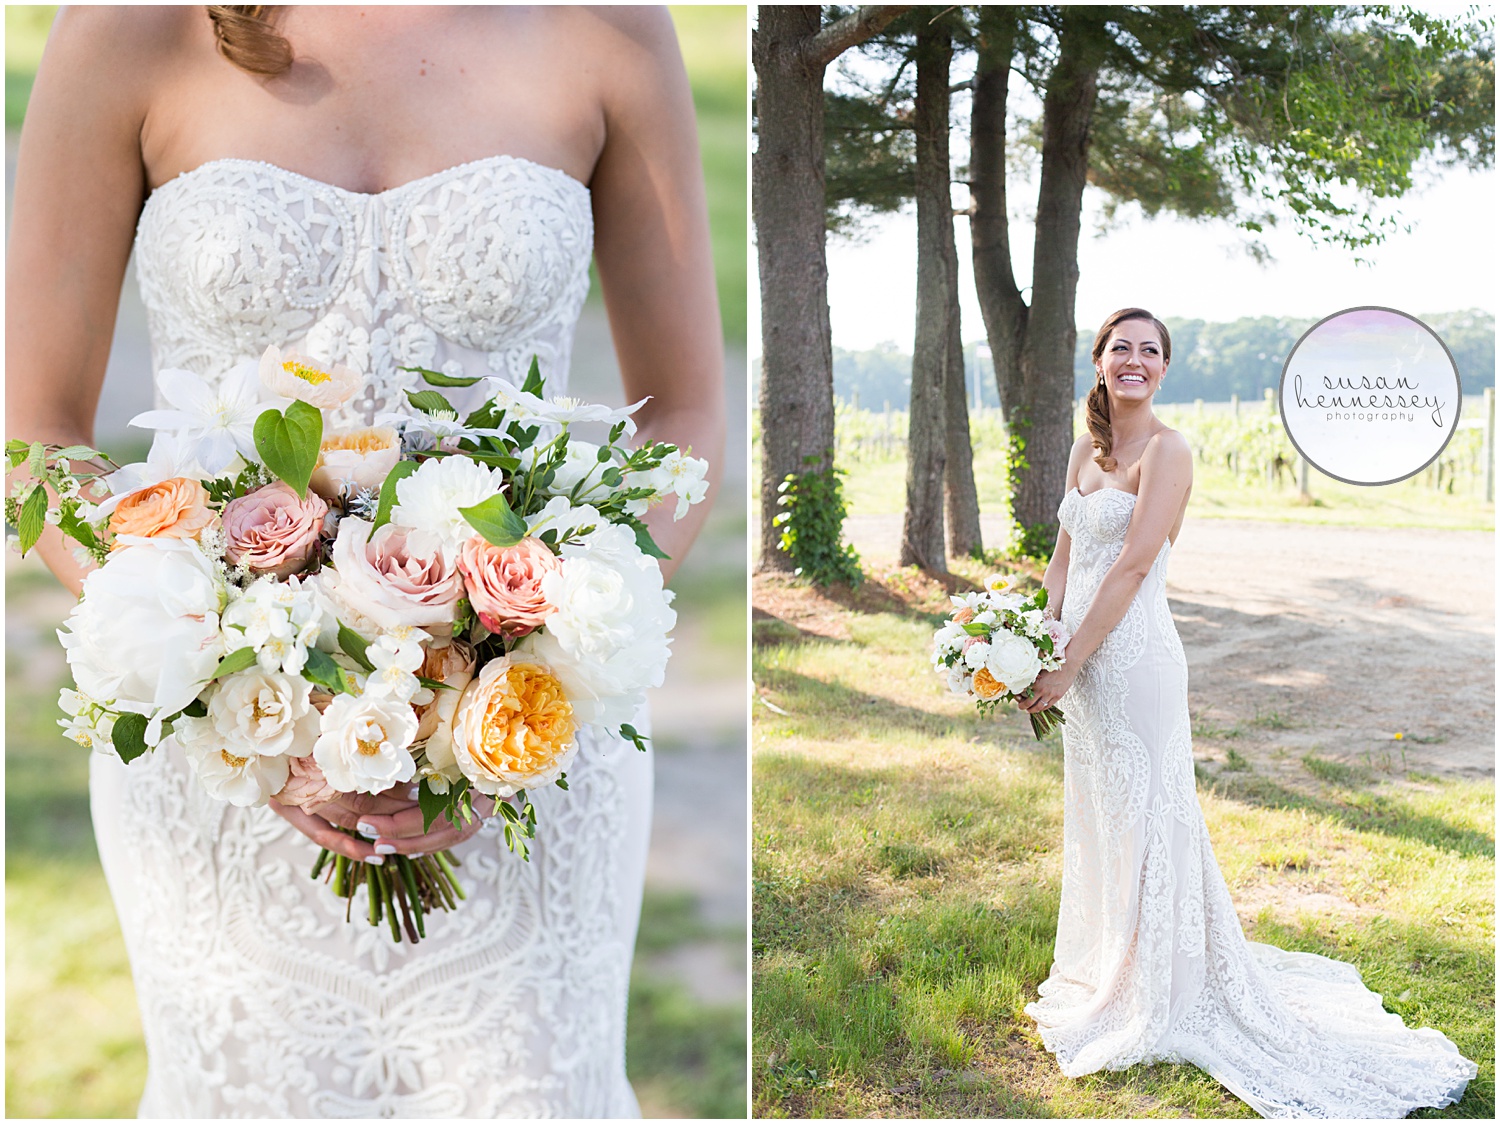 Rustic bouquet from Wild Stems at Laurita Winery